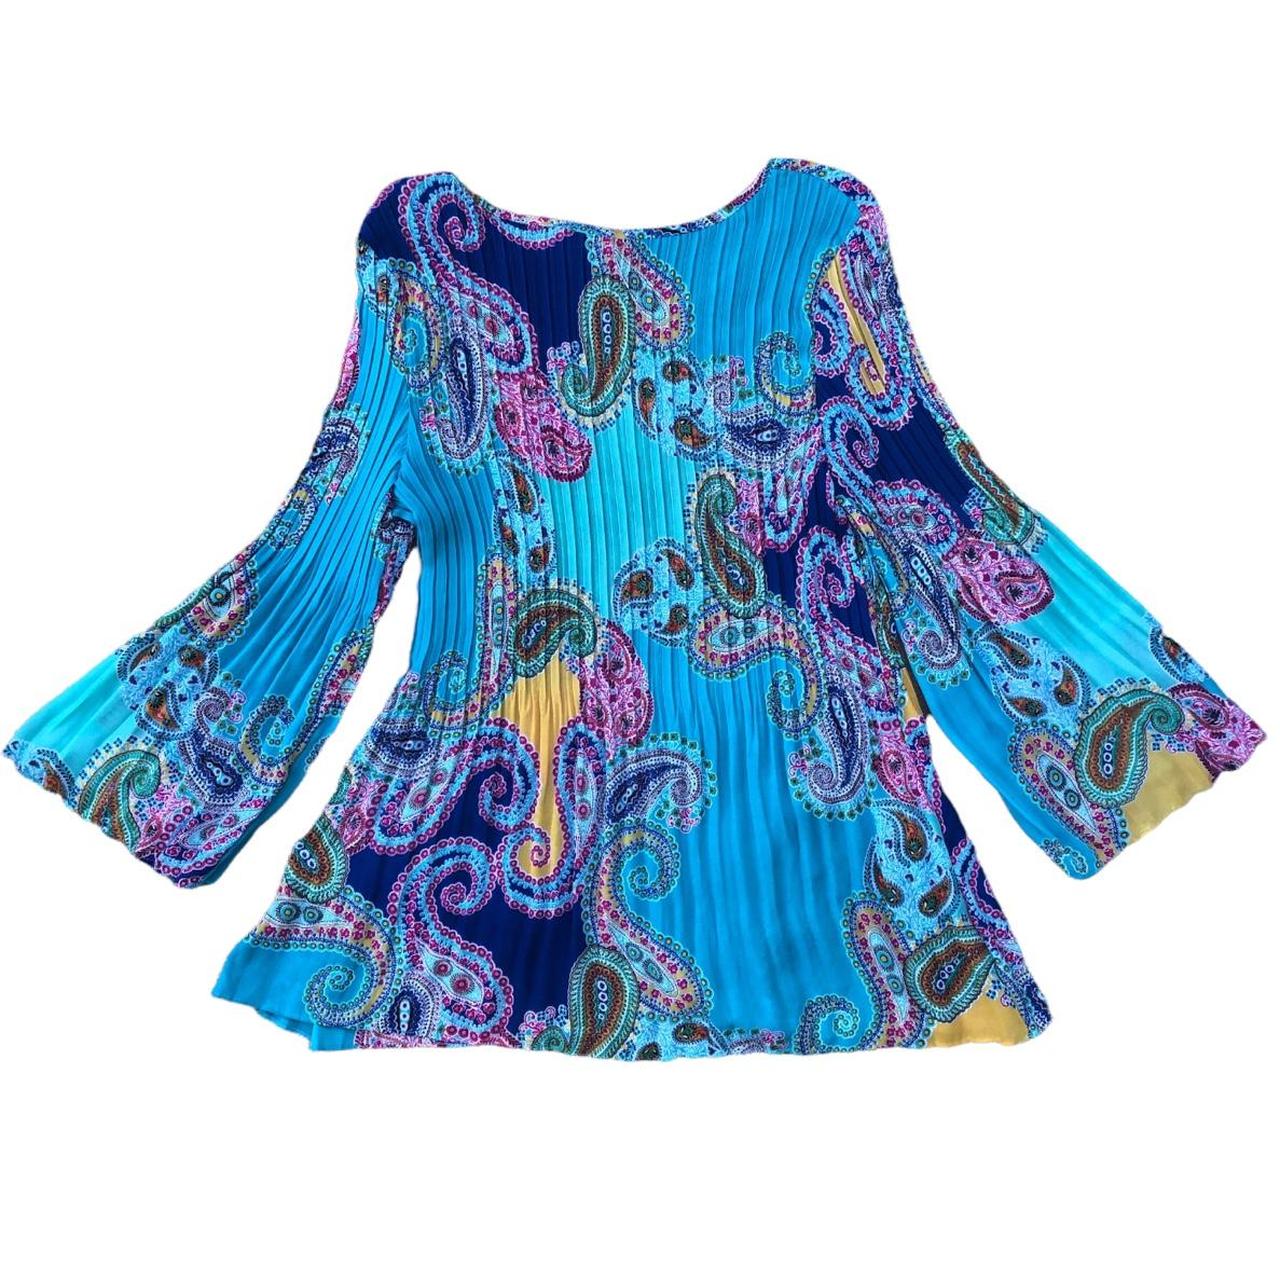 Product Image 2 - Pretty Paisley Print Tunic Top

Ribbed